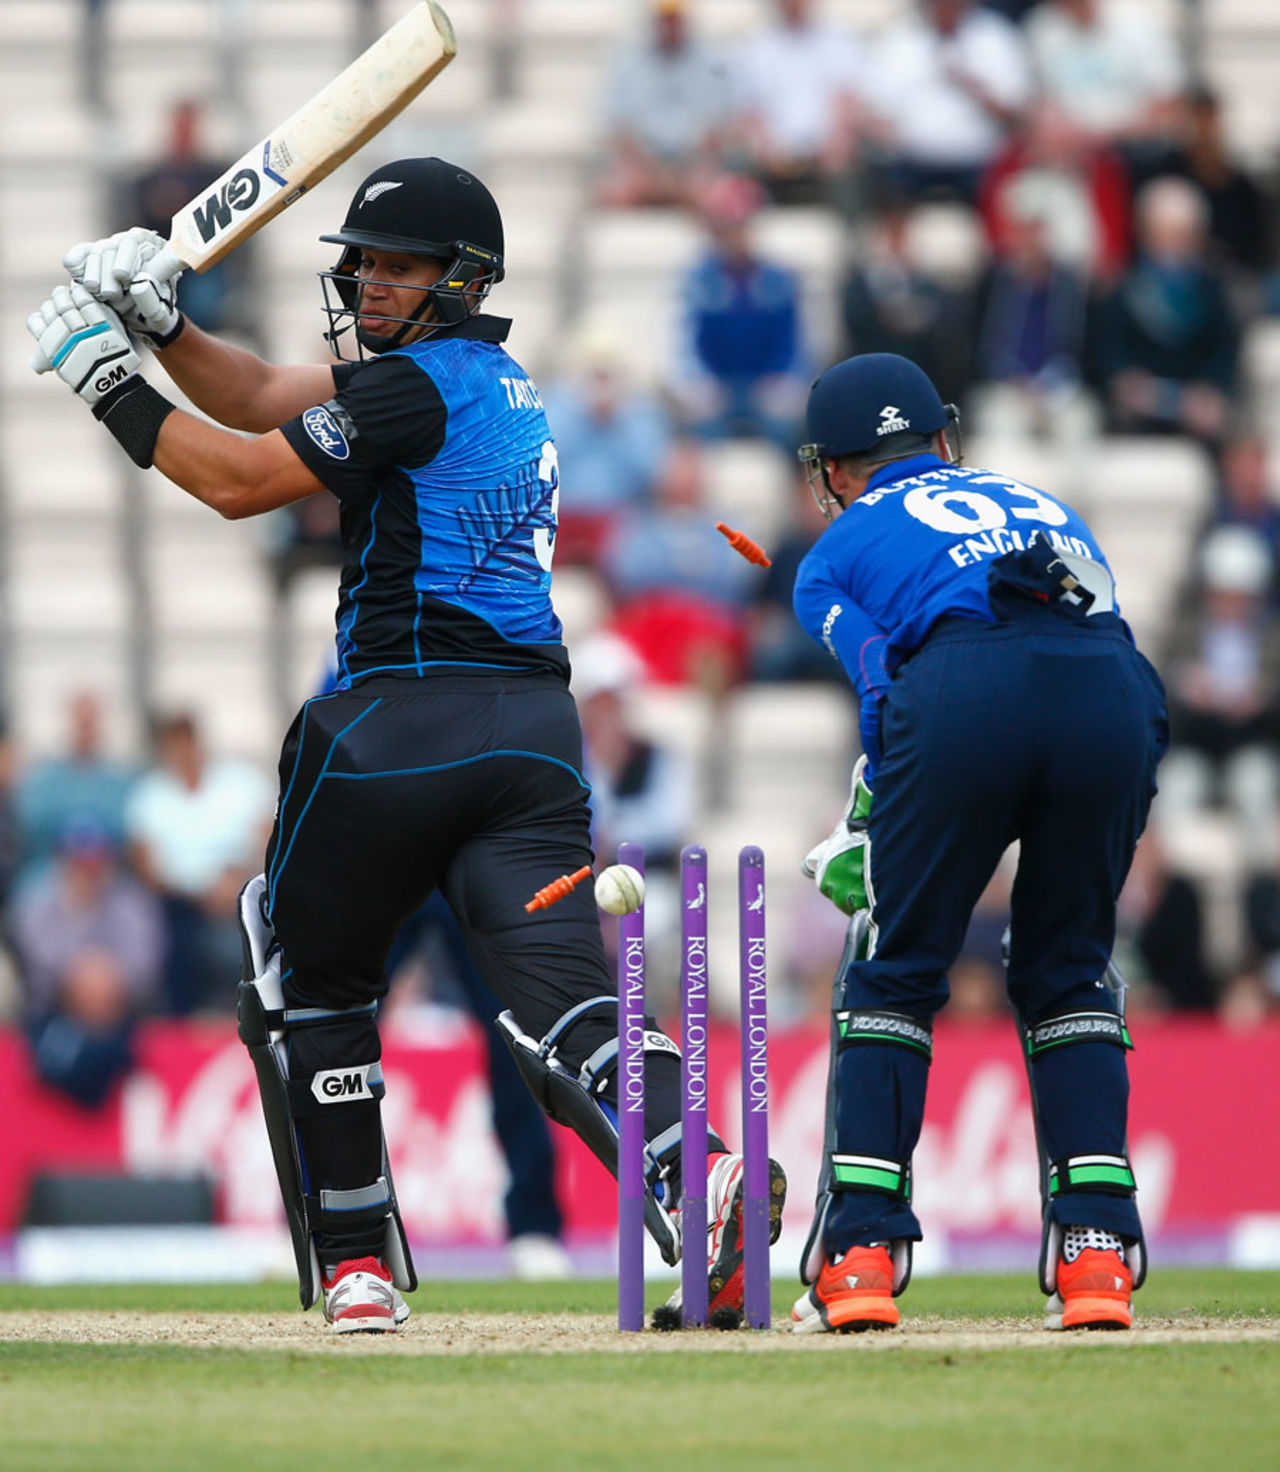 Ross Taylor was bowled by David Willey for 110, England v New Zealand, 3rd ODI, Ageas Bowl, June 14, 2015